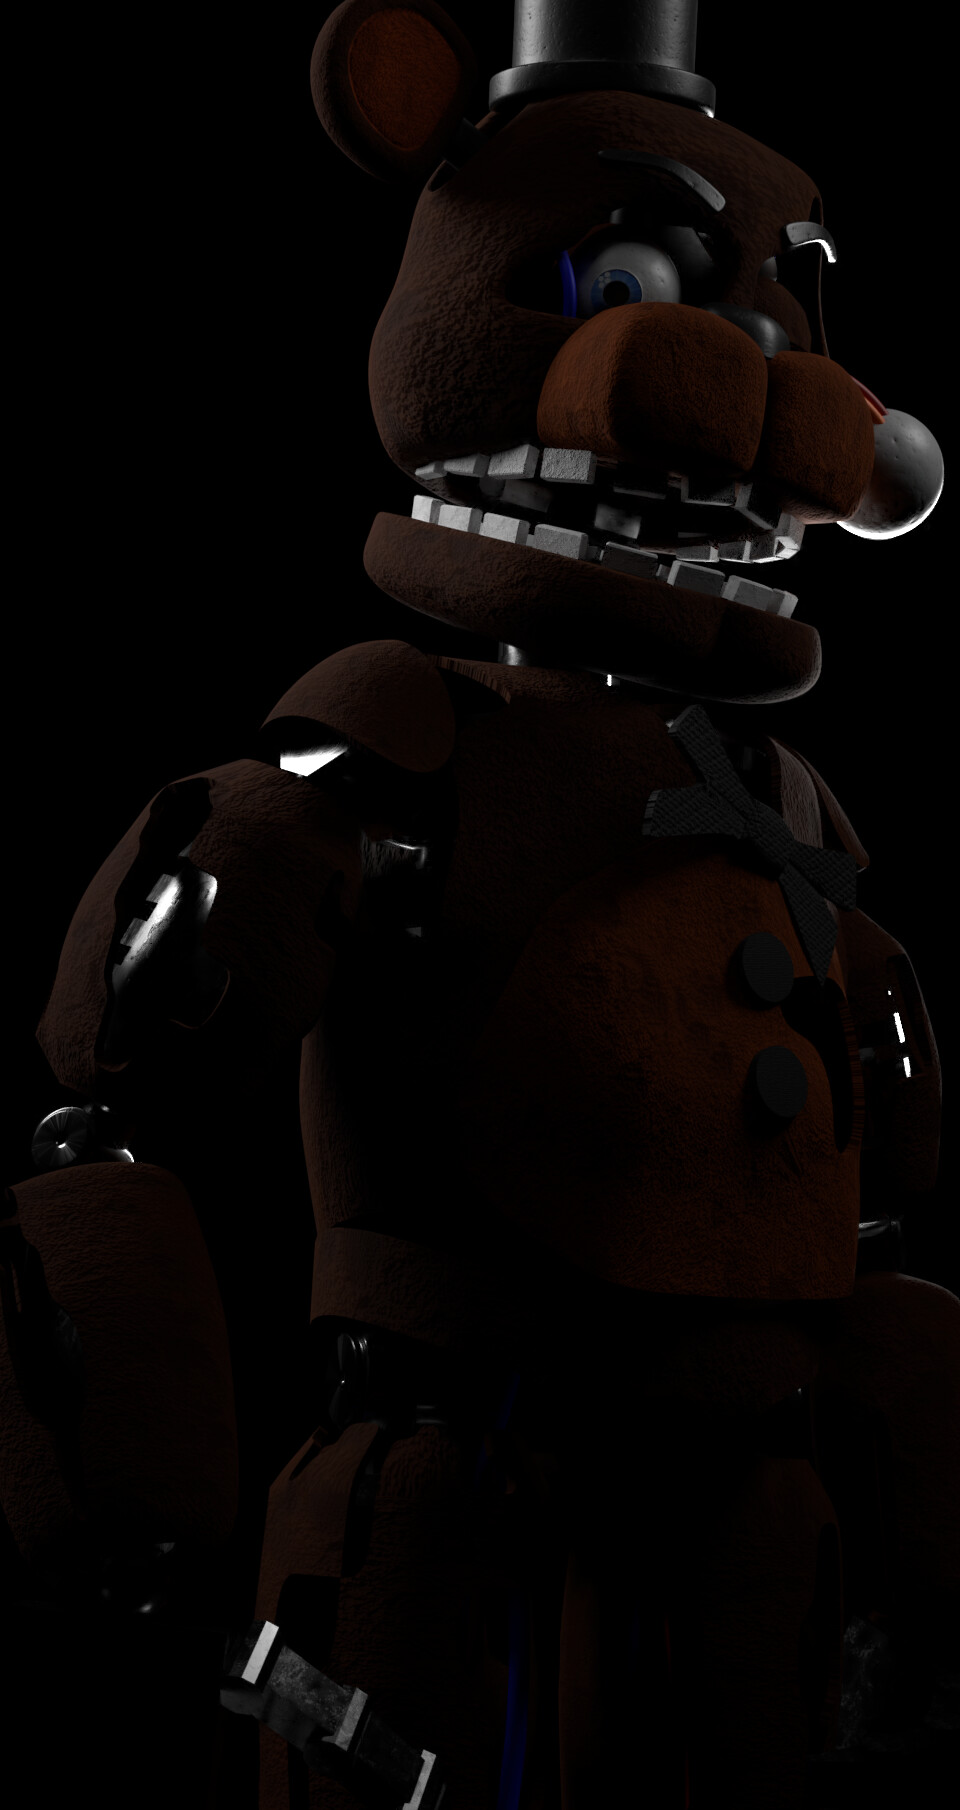 ArtStation - Five Nights at Freddy's 2 Redesign - Withered